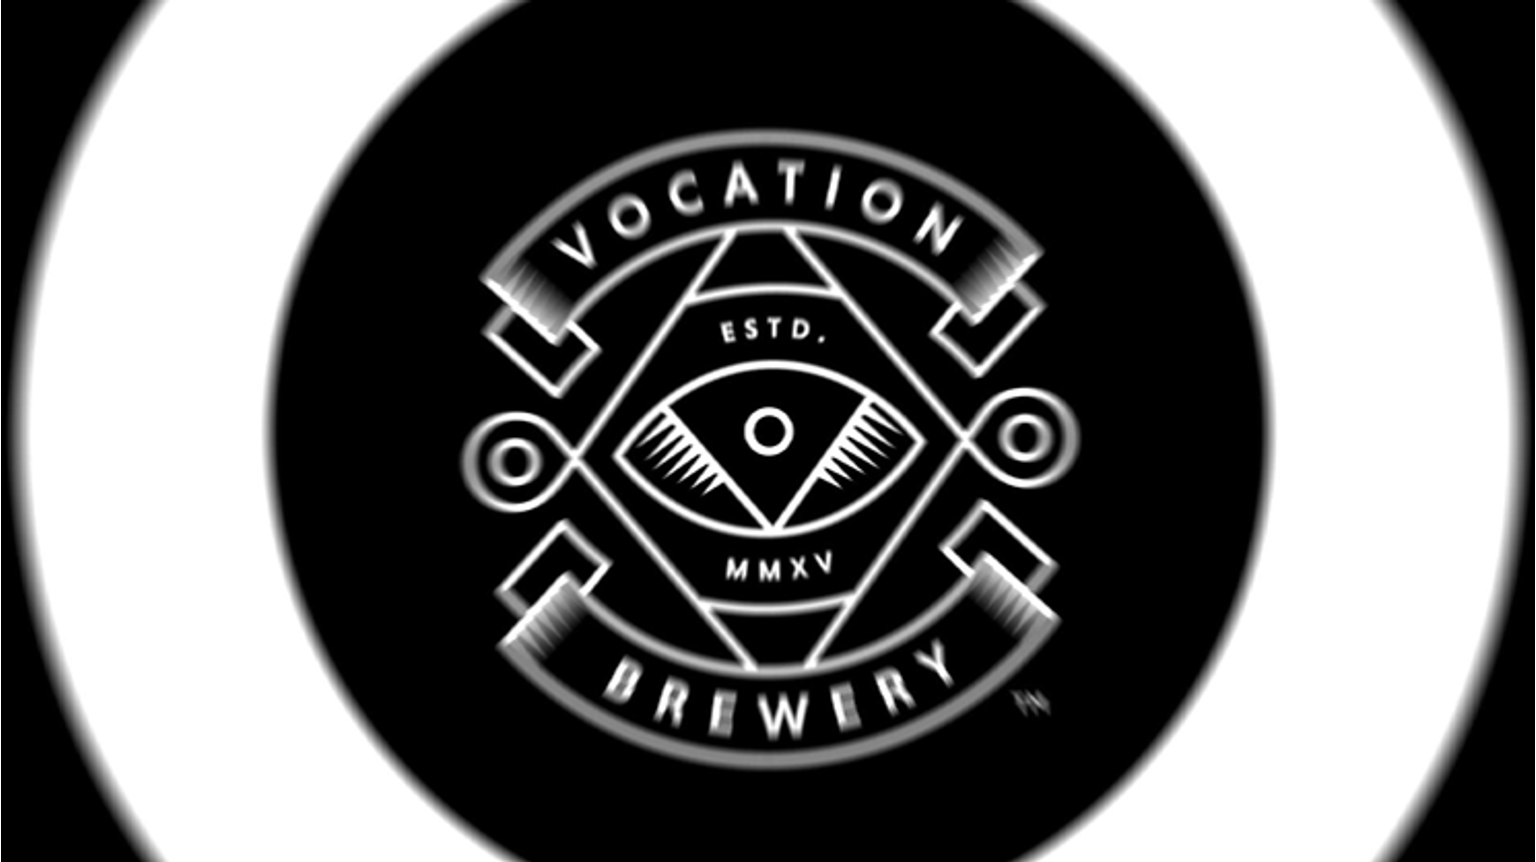 thumbnail for blog article named: Vocation Brewery